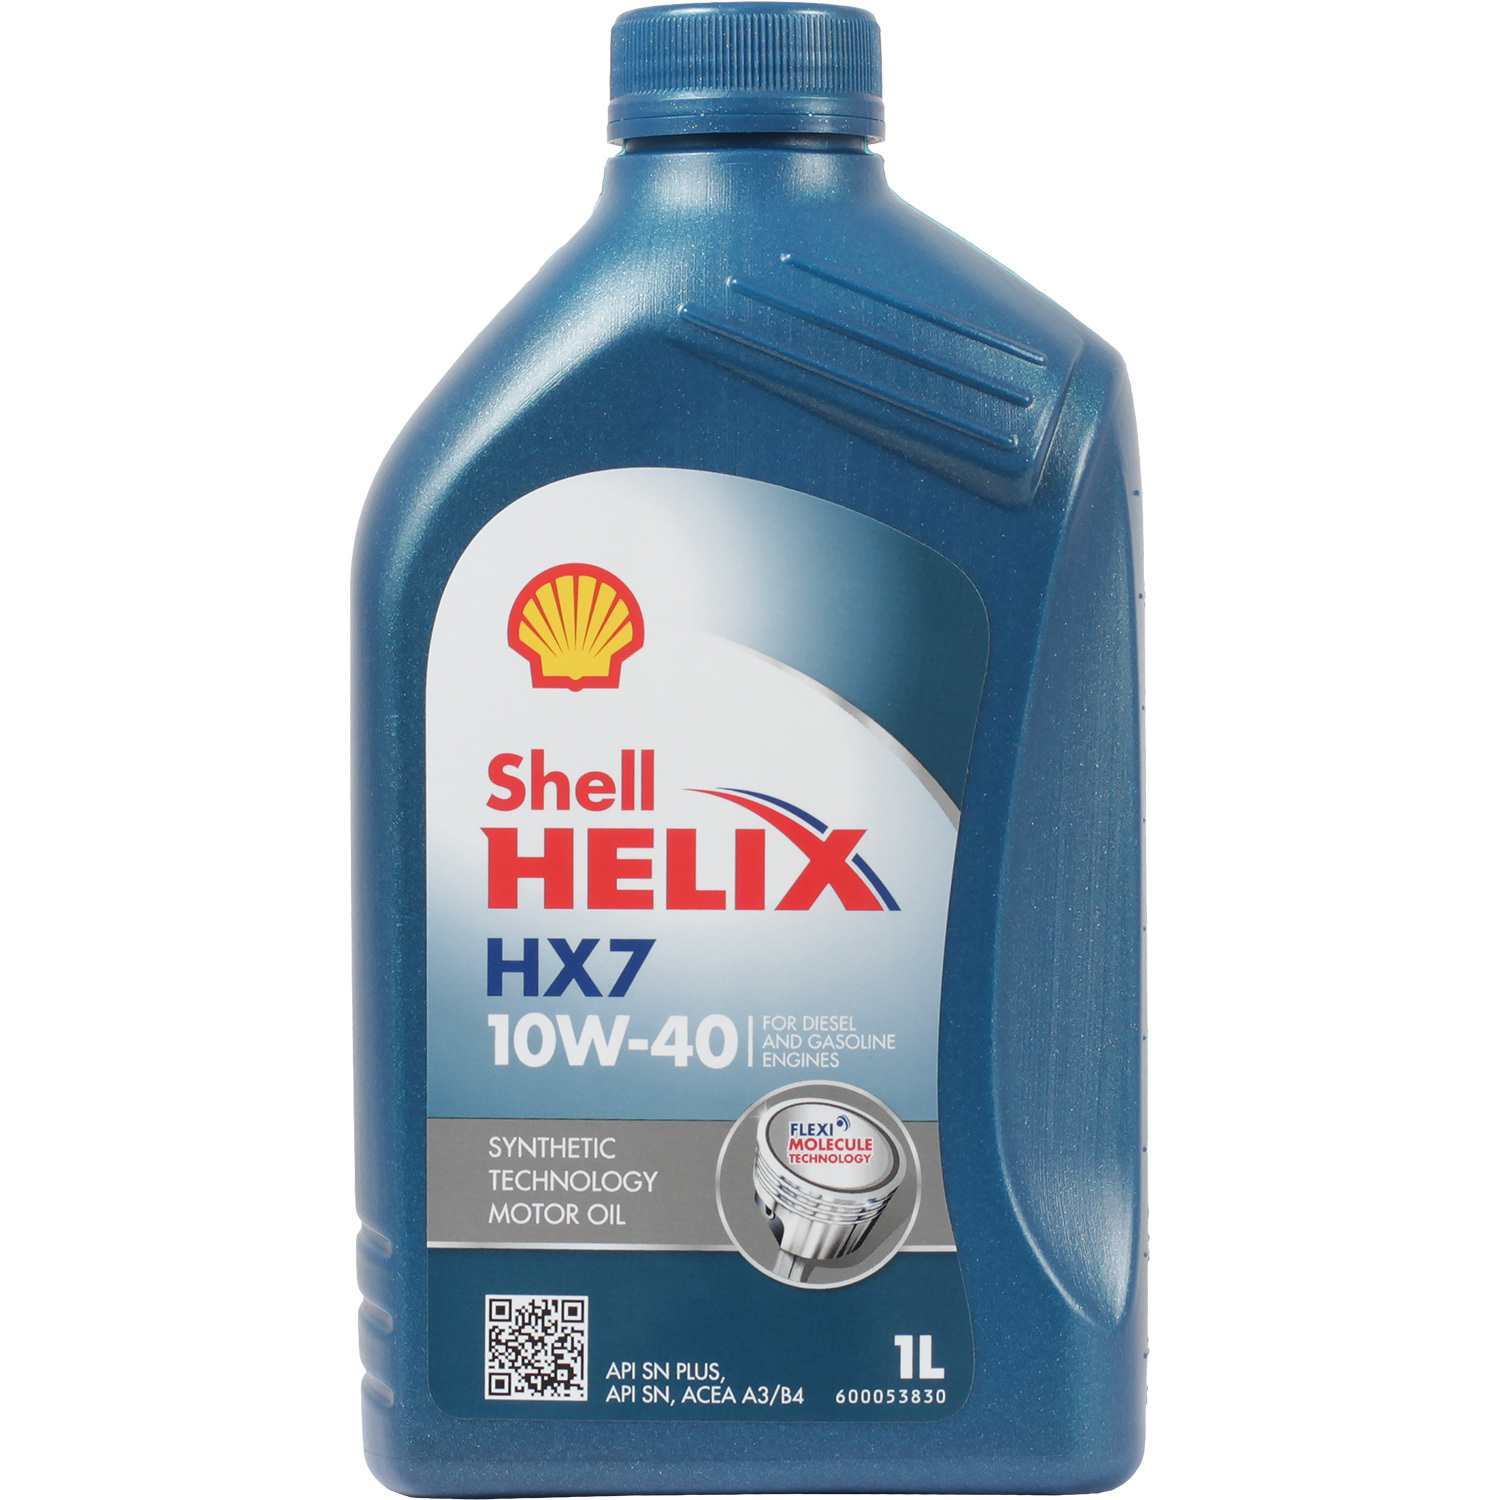 Shell Моторное масло Shell Helix HX7 10W-40, 1 л